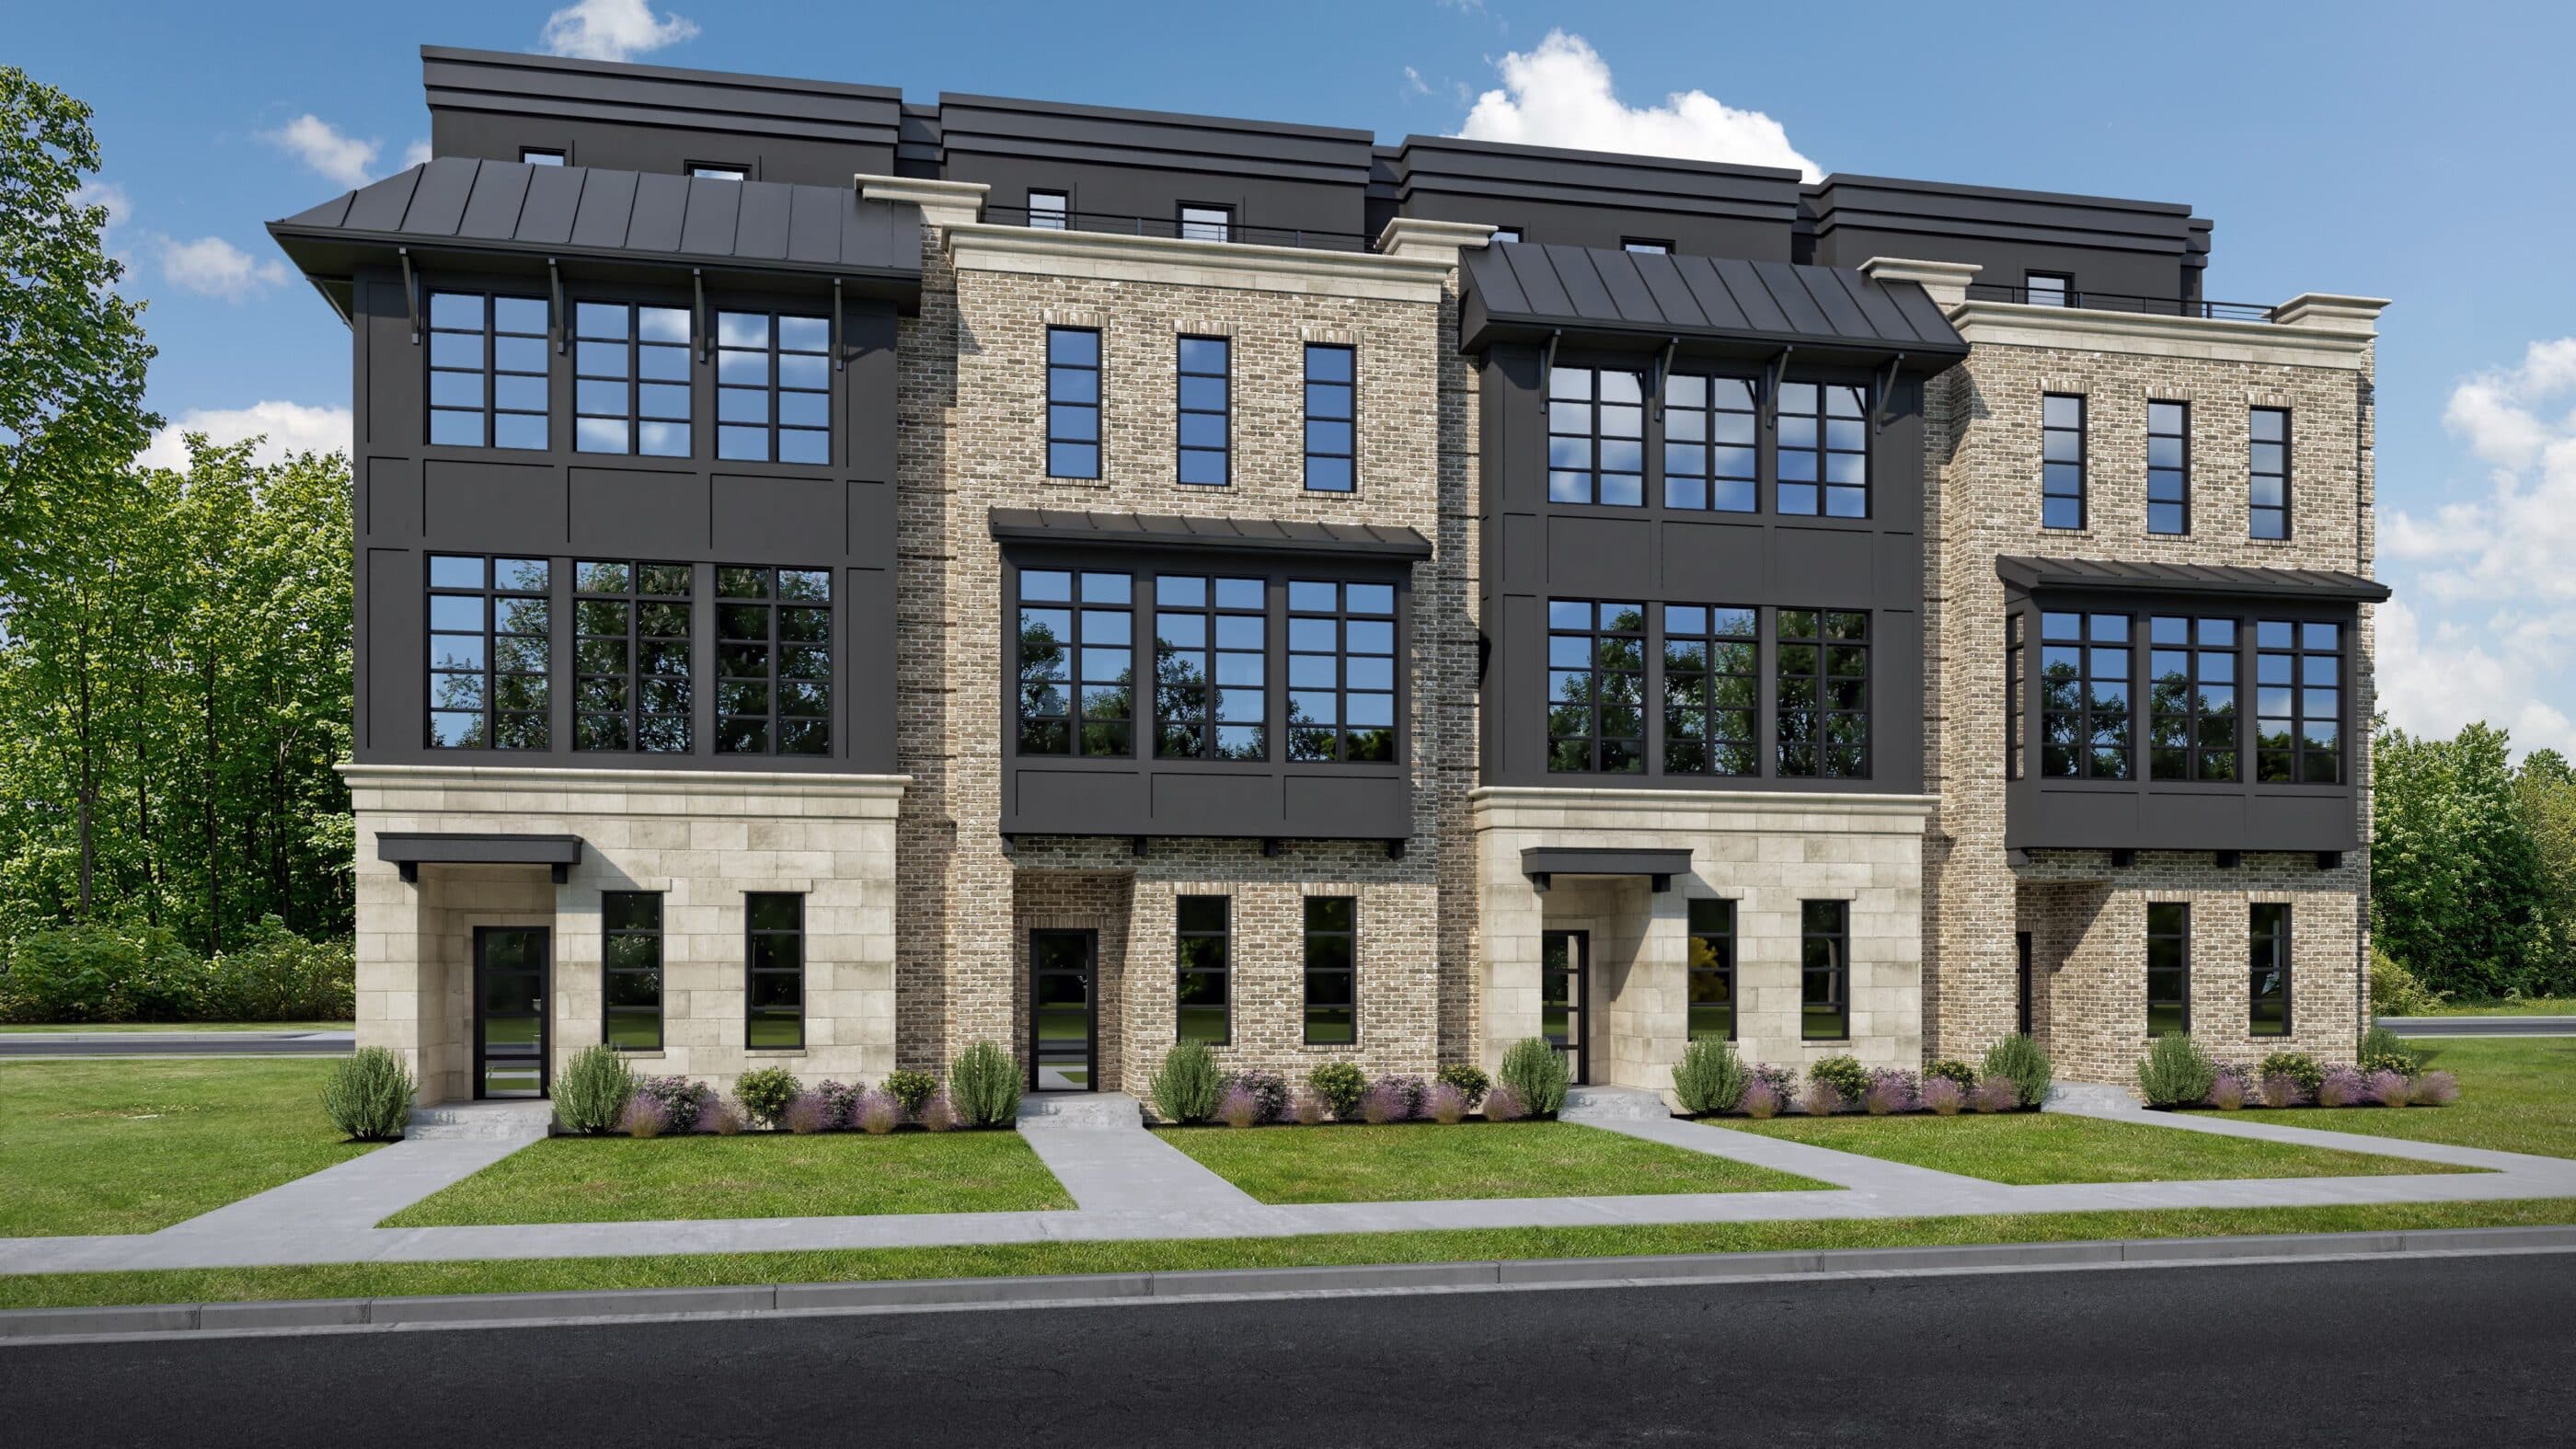 1st Avenue Towns Community | Old Town Design Group